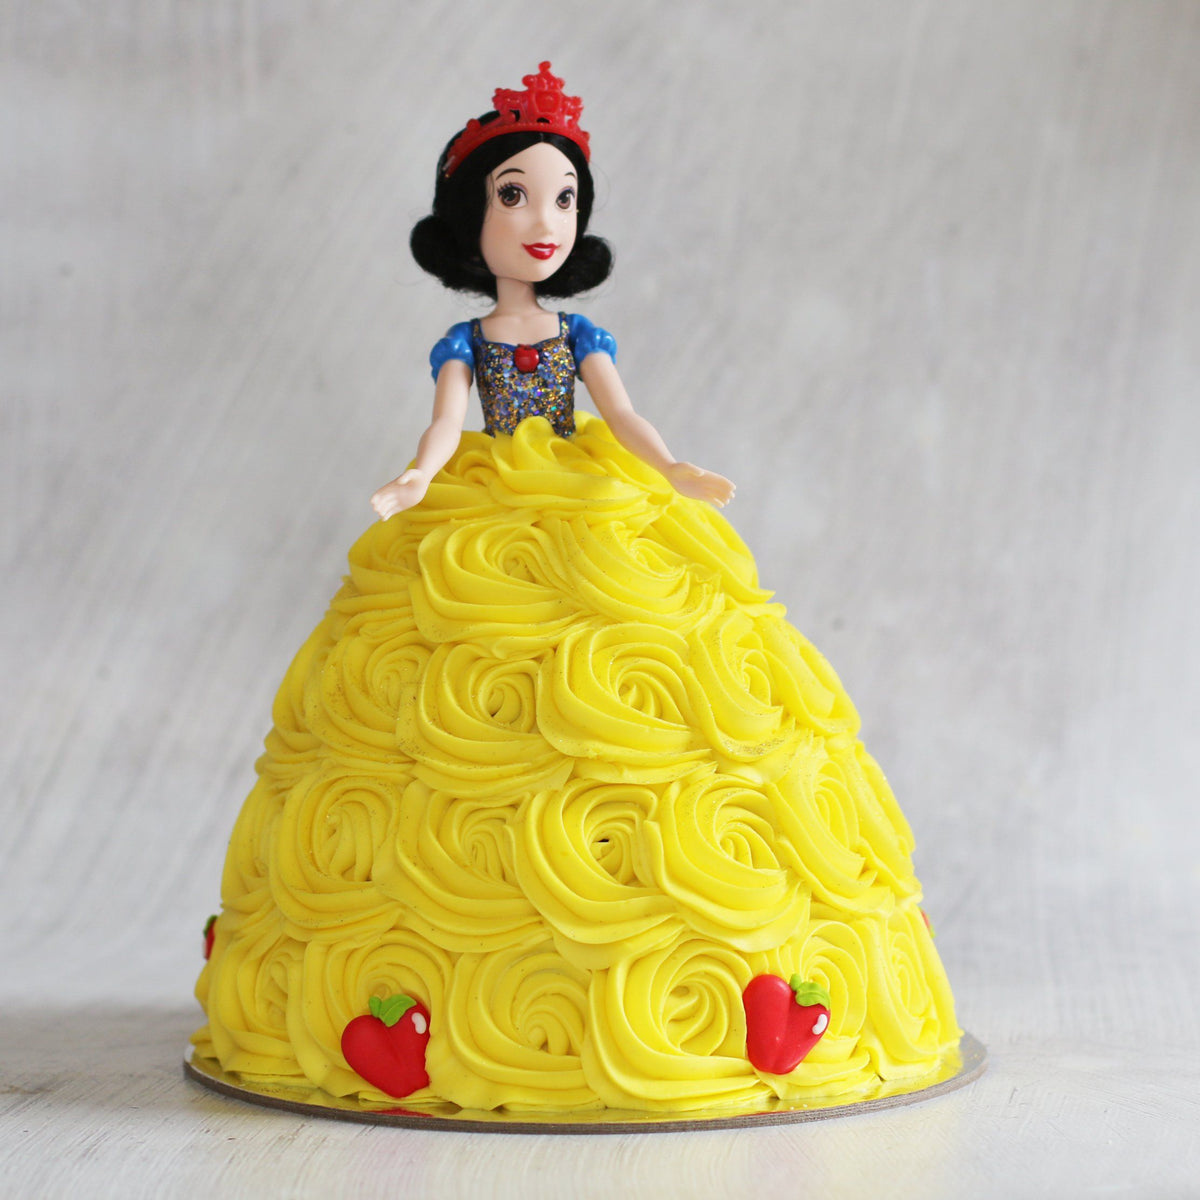 Snow White Doll Cake Special Occasion The Cupcake Queens 